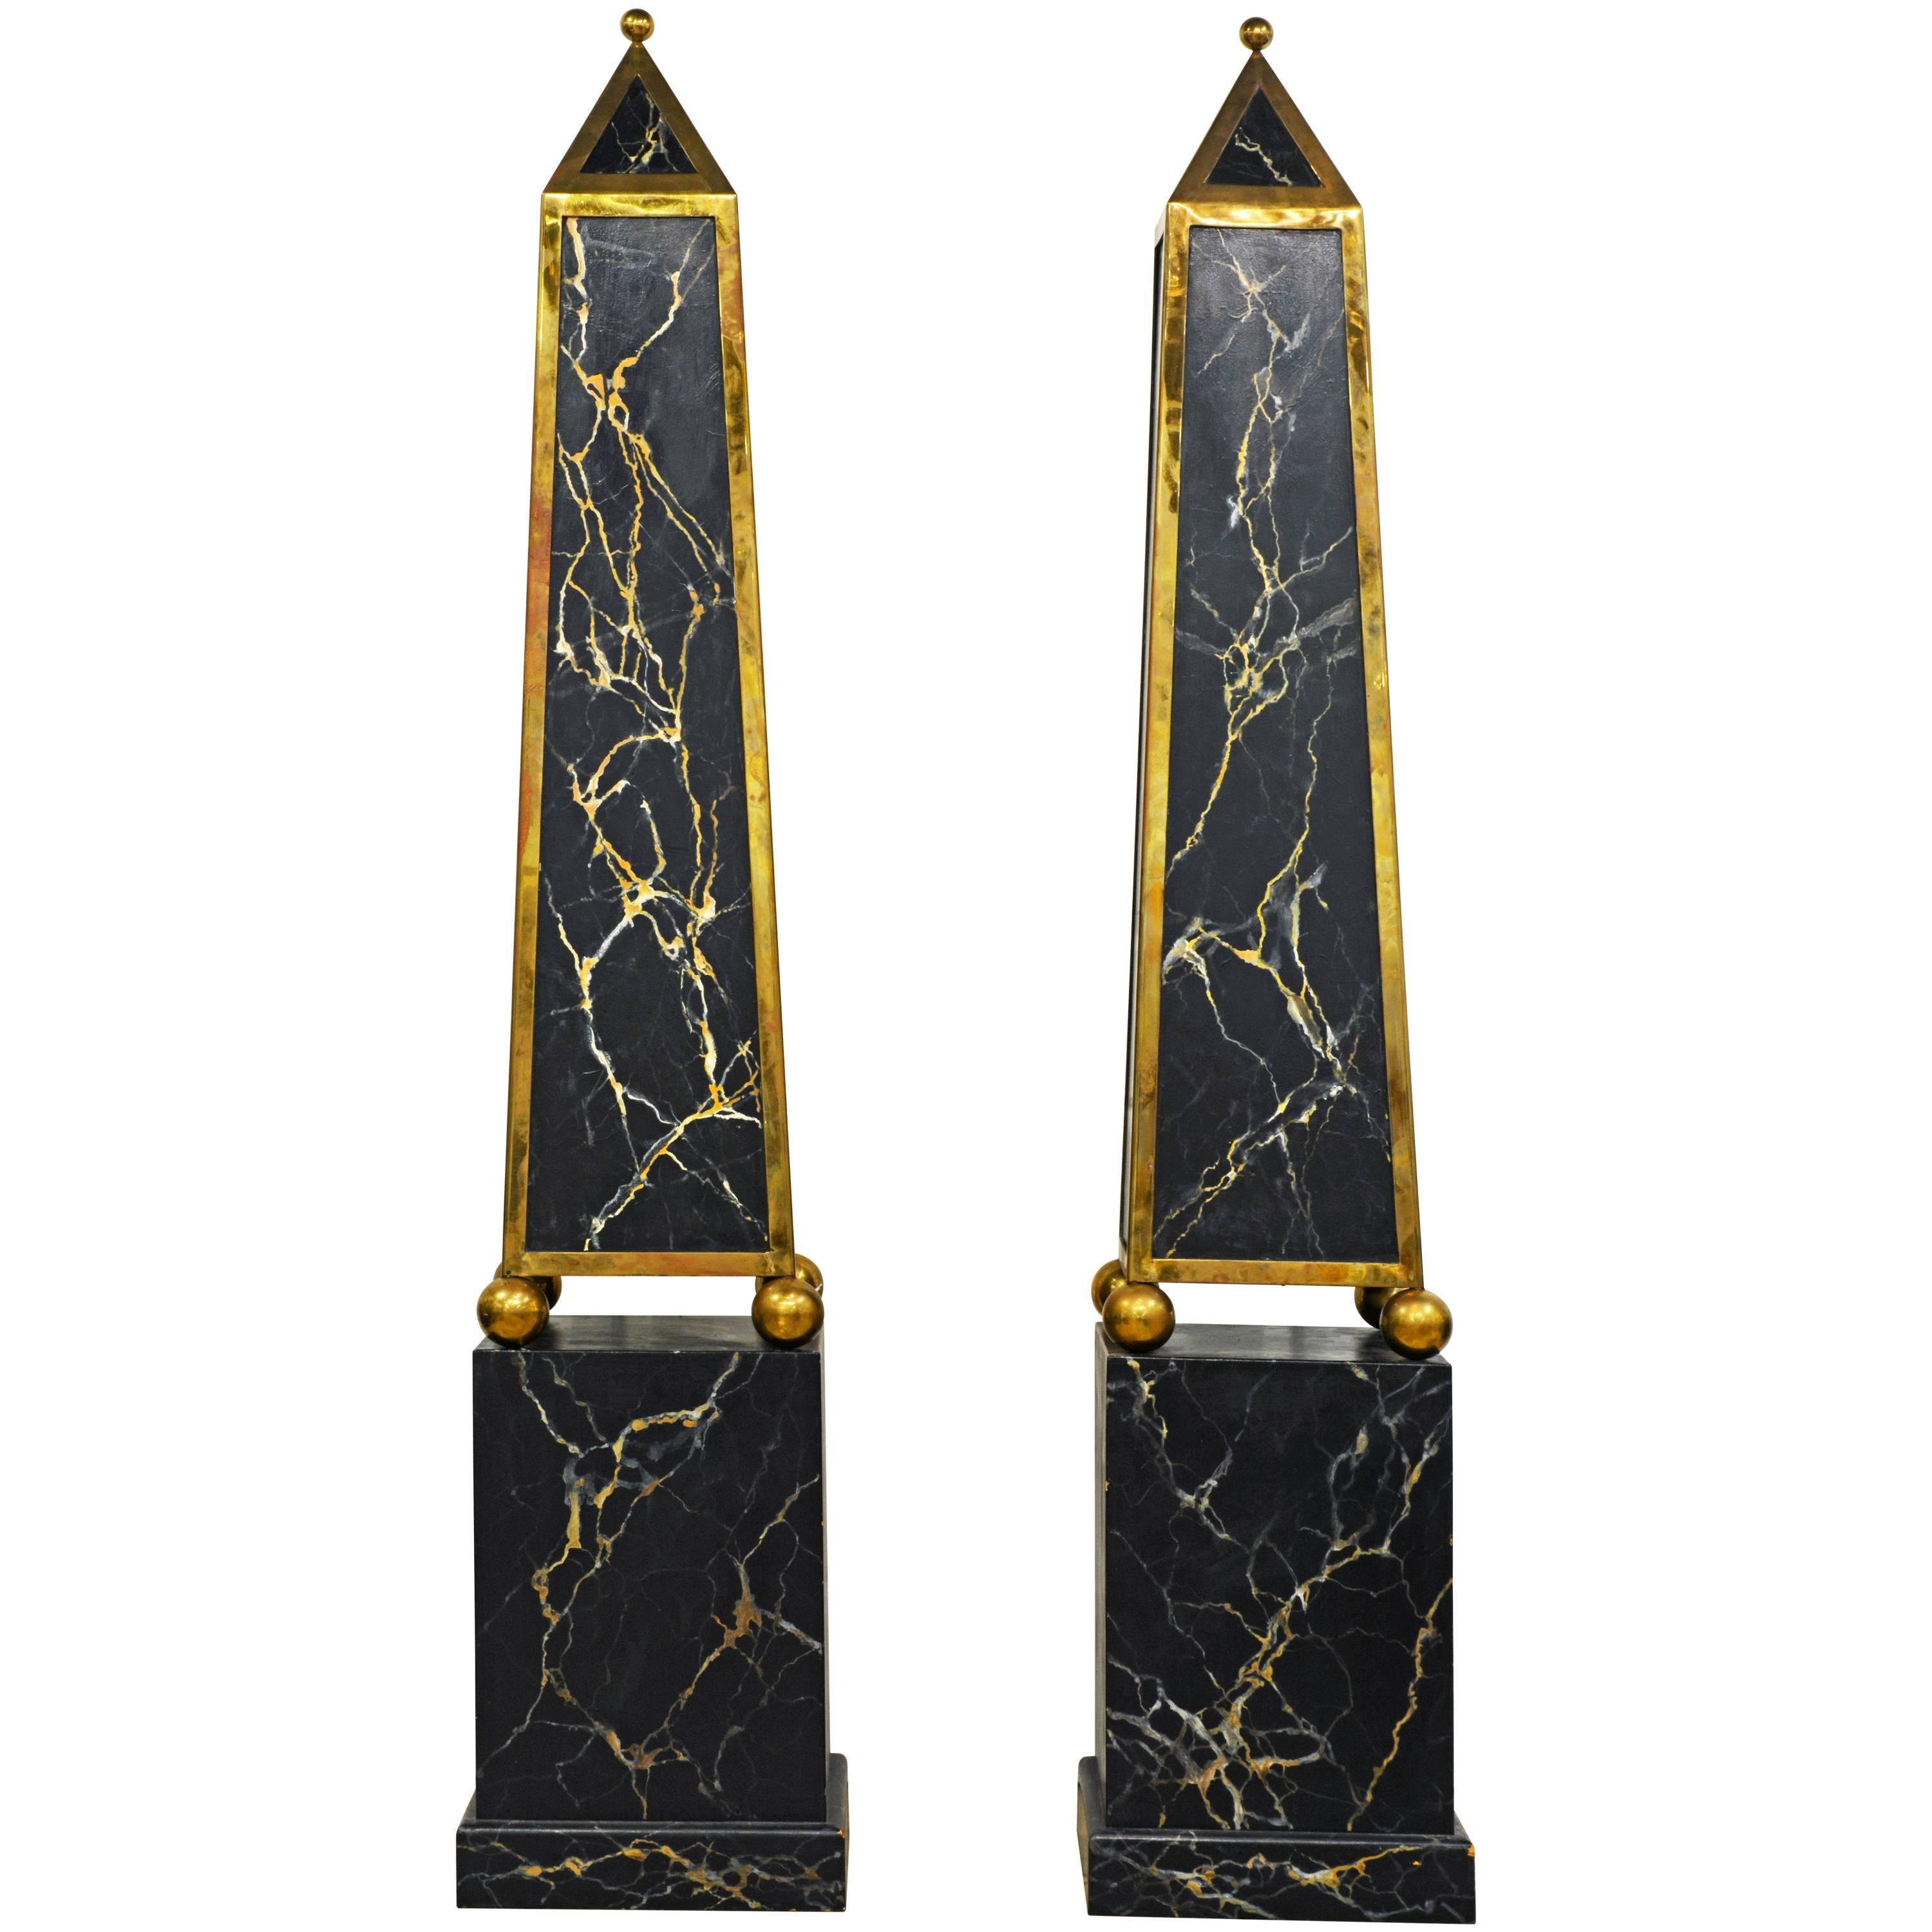 Pair of Monumental Painted and Brass Mounted Neoclassical Obelisks with Cabinets